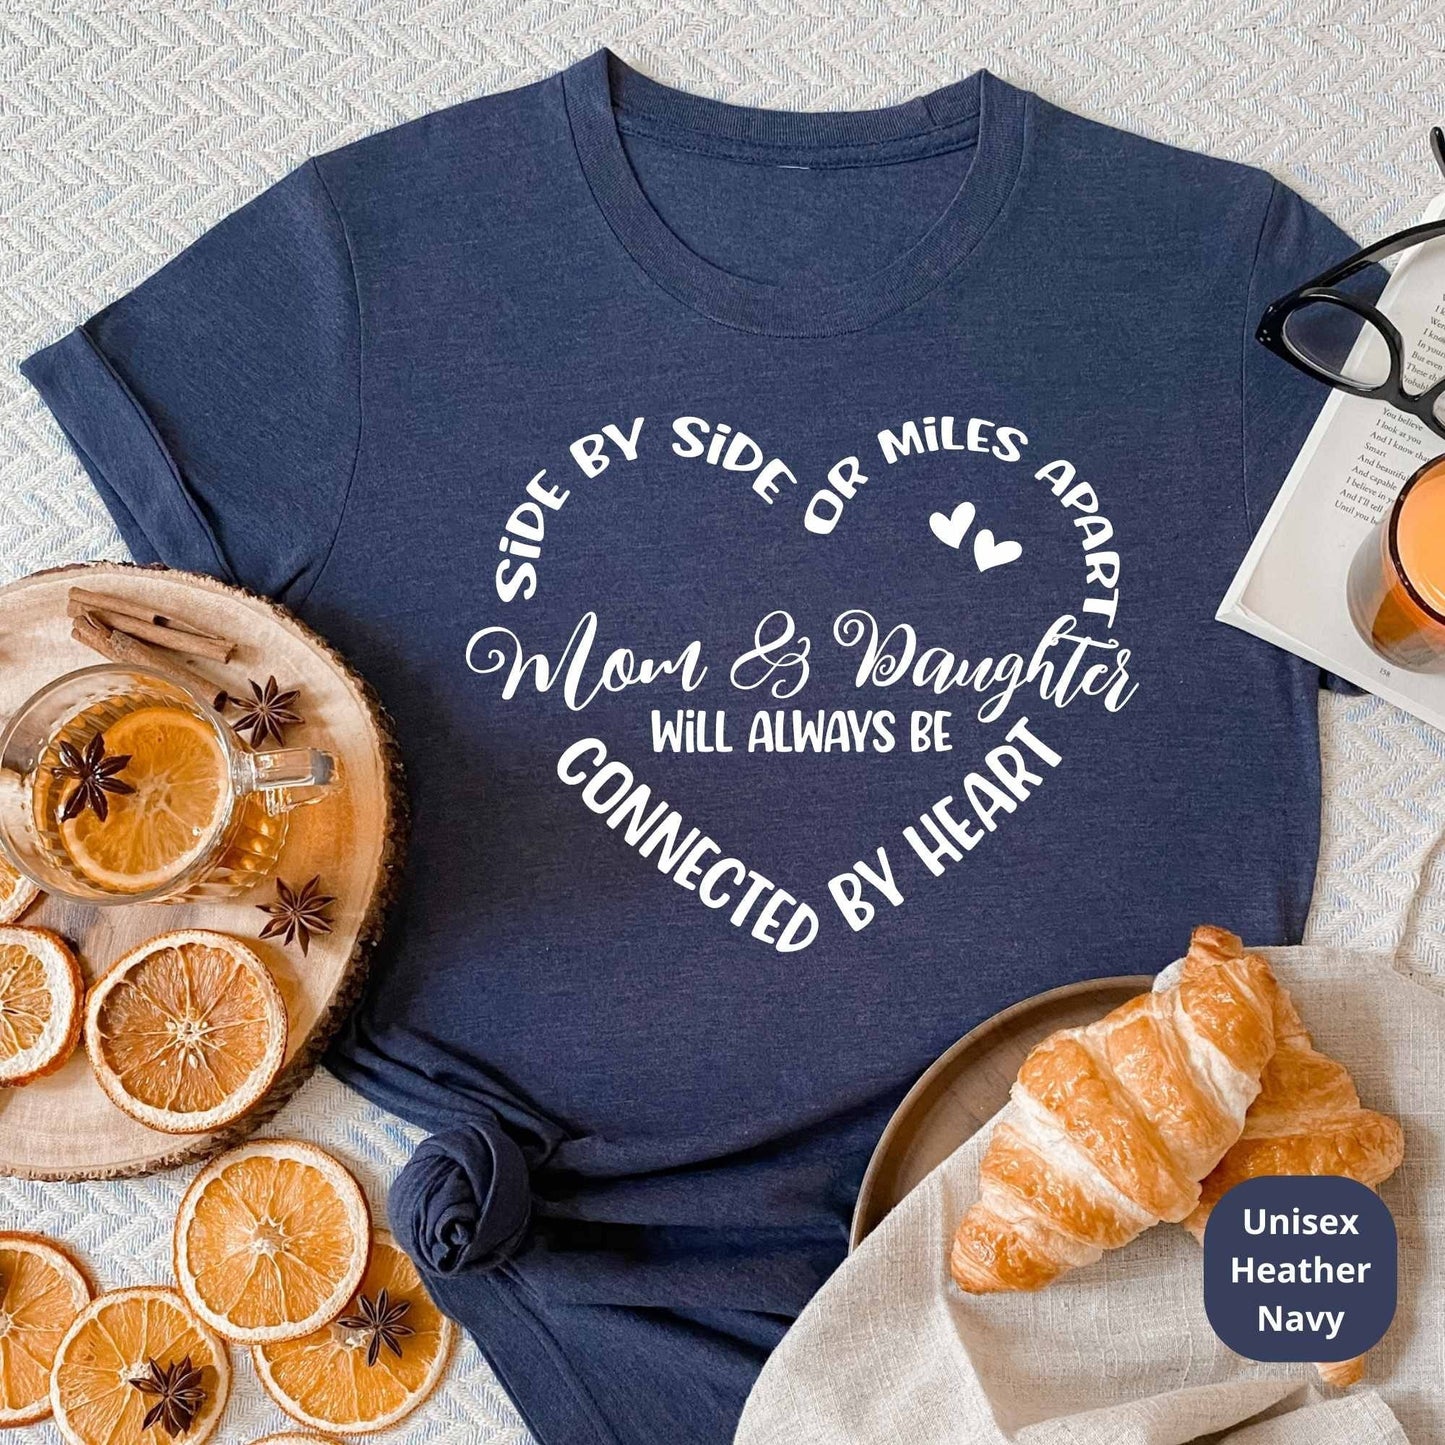 Side By Side or Miles Apart Mother and Daughter Shirts HMDesignStudioUS